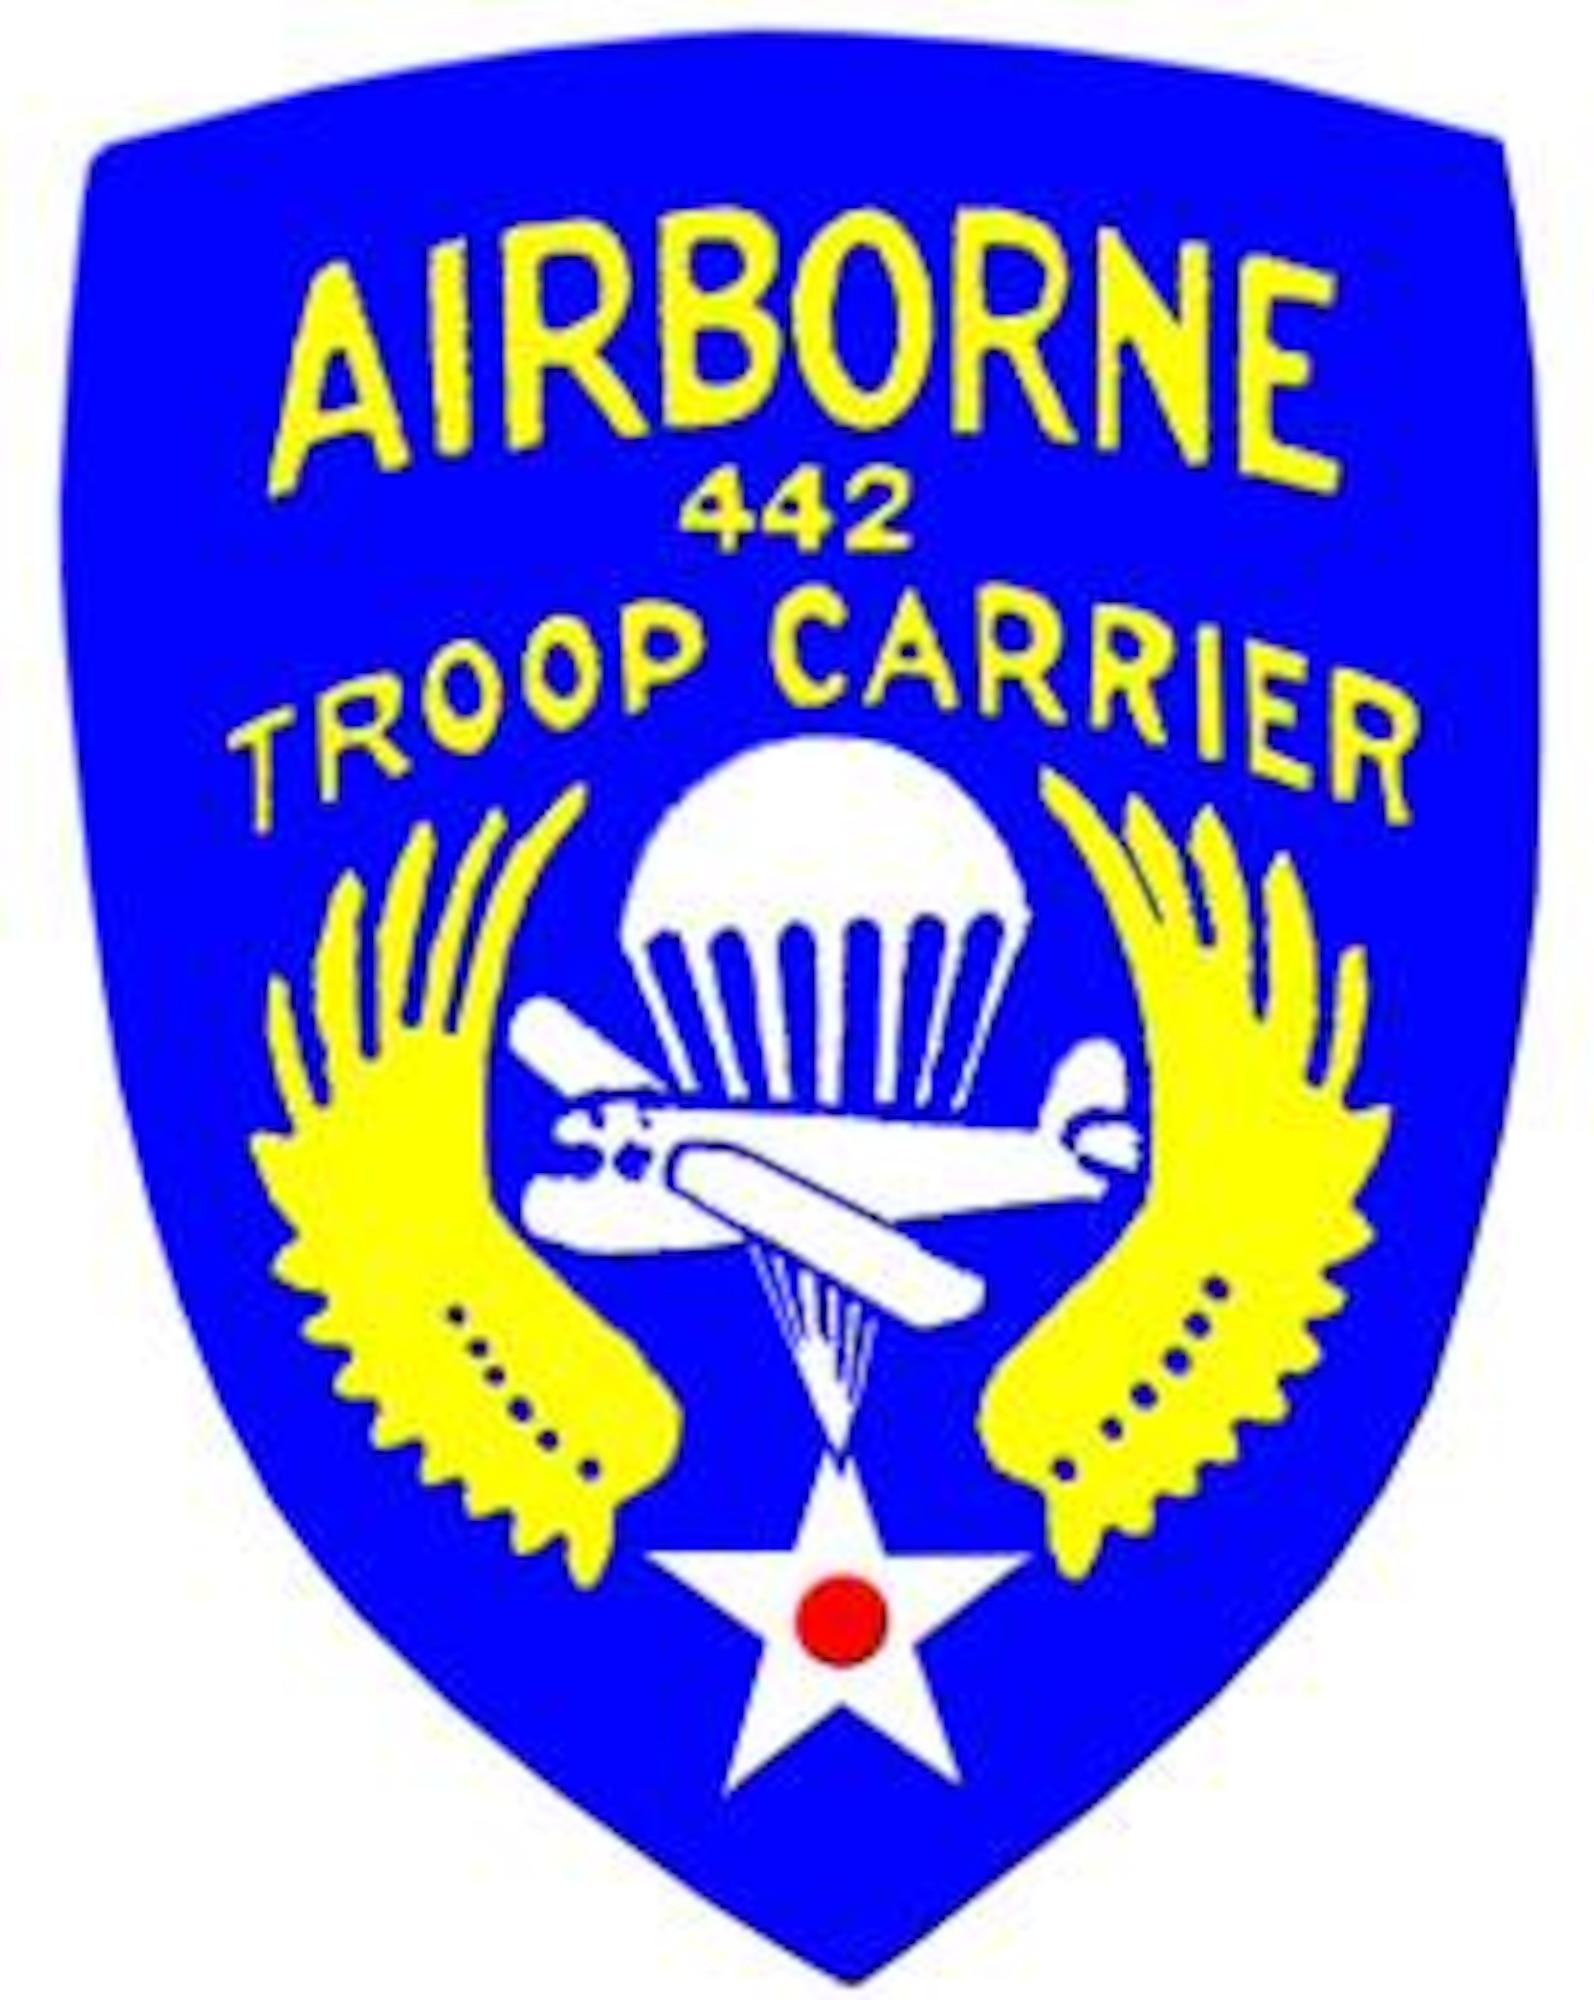 The World War II emblem of the 442nd Troop Carrier Group, which dropped para-troops and towed gliders full of airborne soldiers onto the battle fields of Europe. The group was the forerunner of today's 442nd Fighter Wing, which is an Air Force Reserve unit based at Whiteman Air Force Base, Mo.